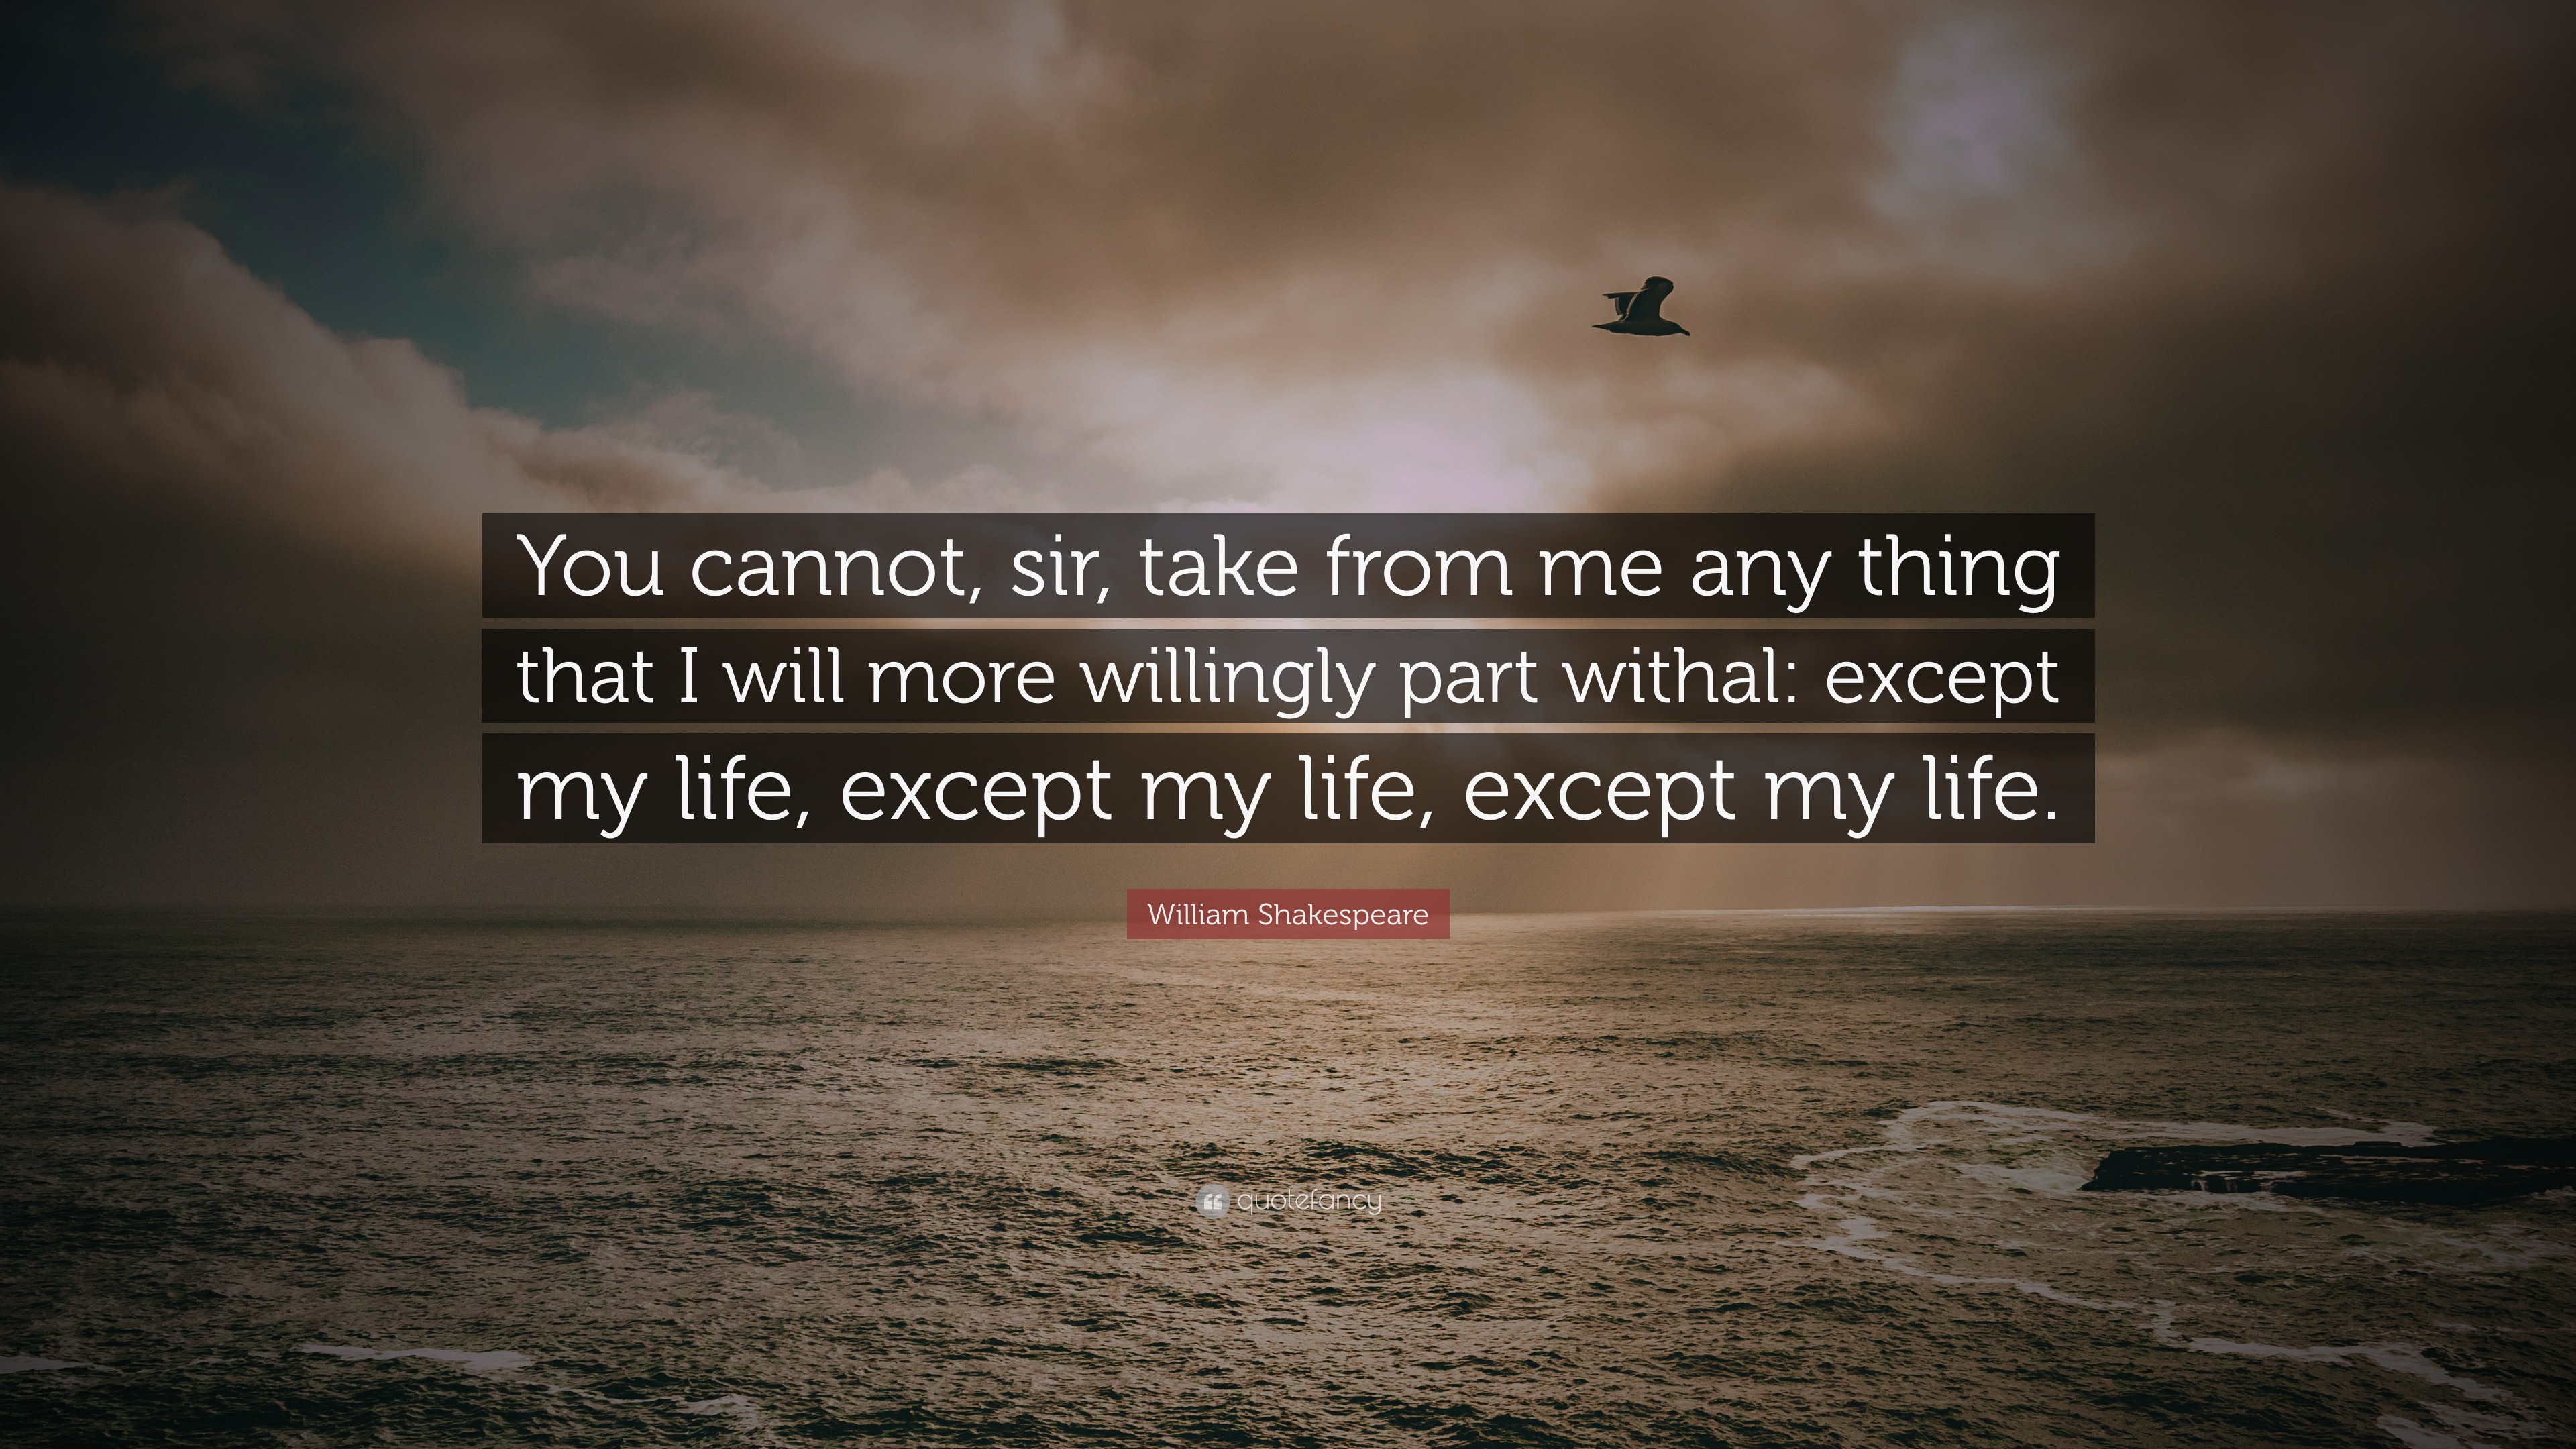 William Shakespeare Quote: “You cannot, sir, take from me any thing ...